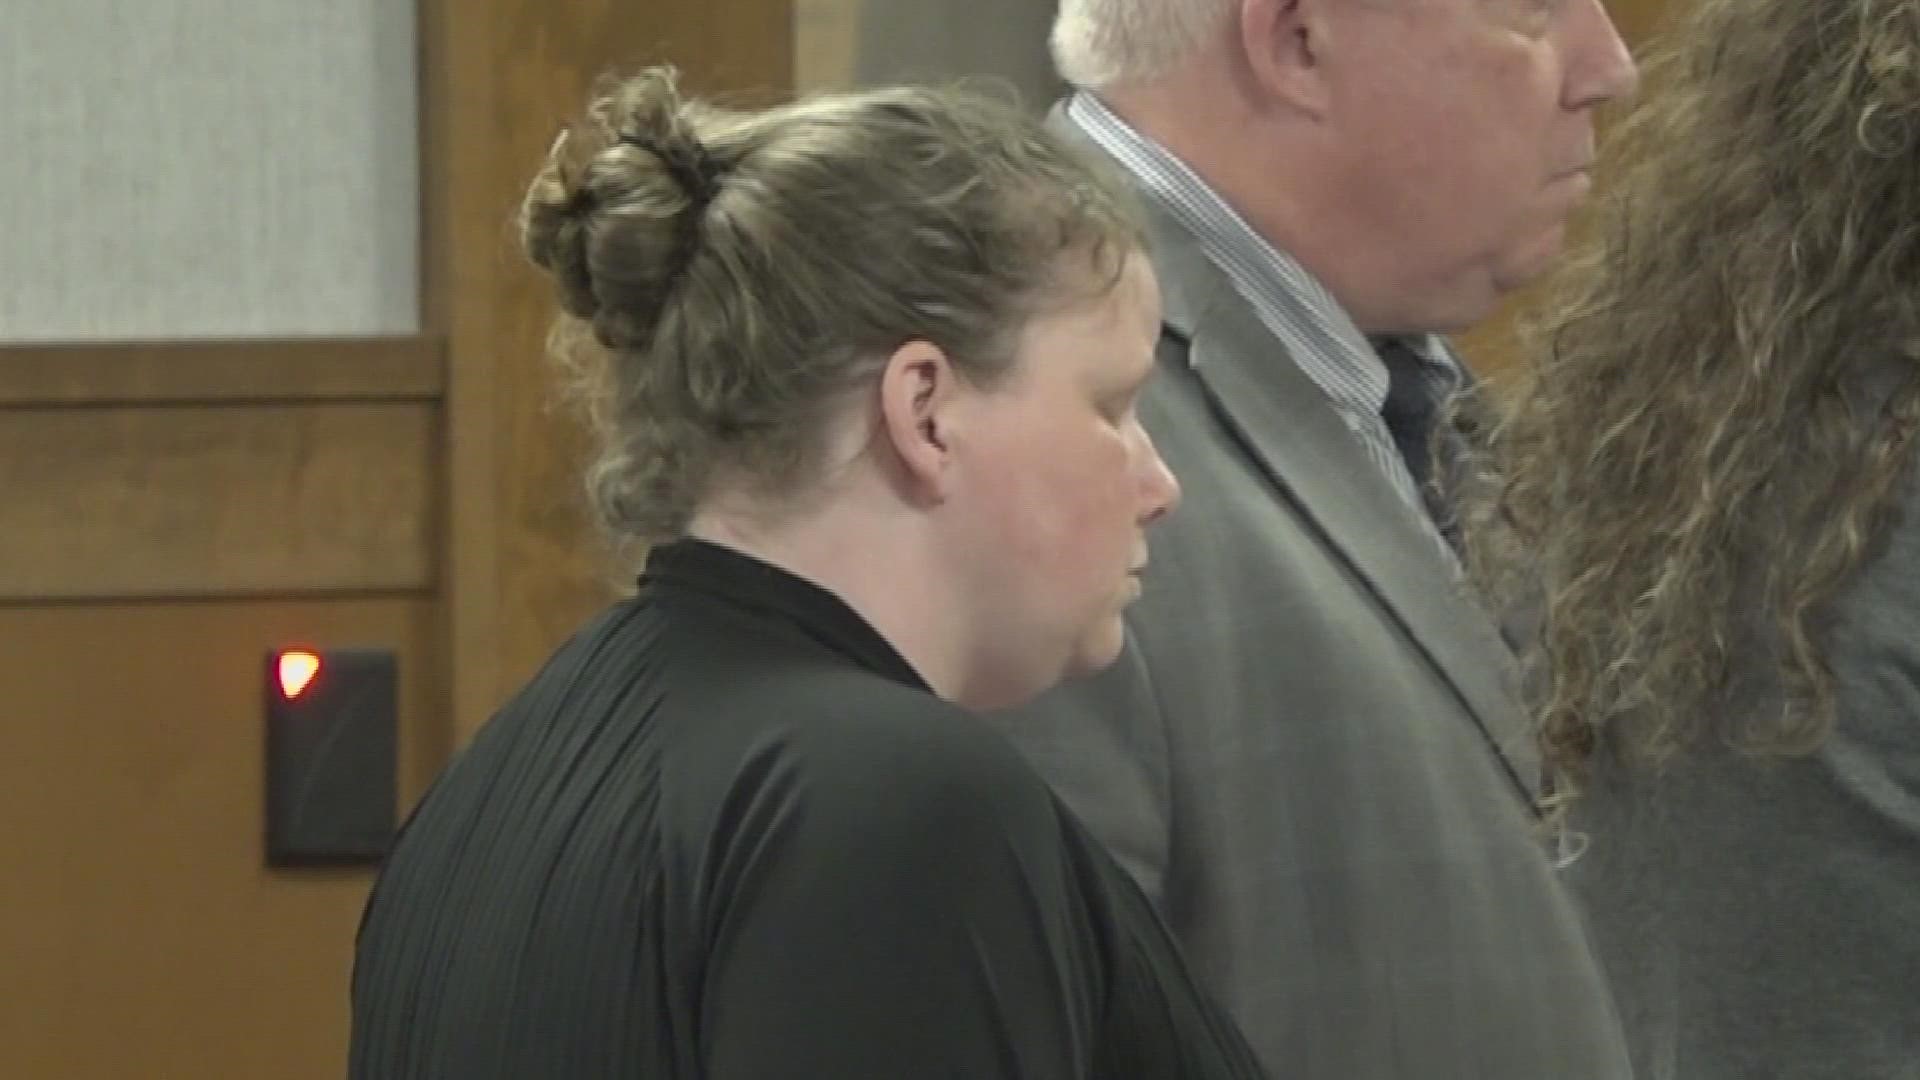 Jessica Trefethen pled not guilty to depraved indifference murder in connection to the death of her 3-year-old son, Maddox, in June 2021.